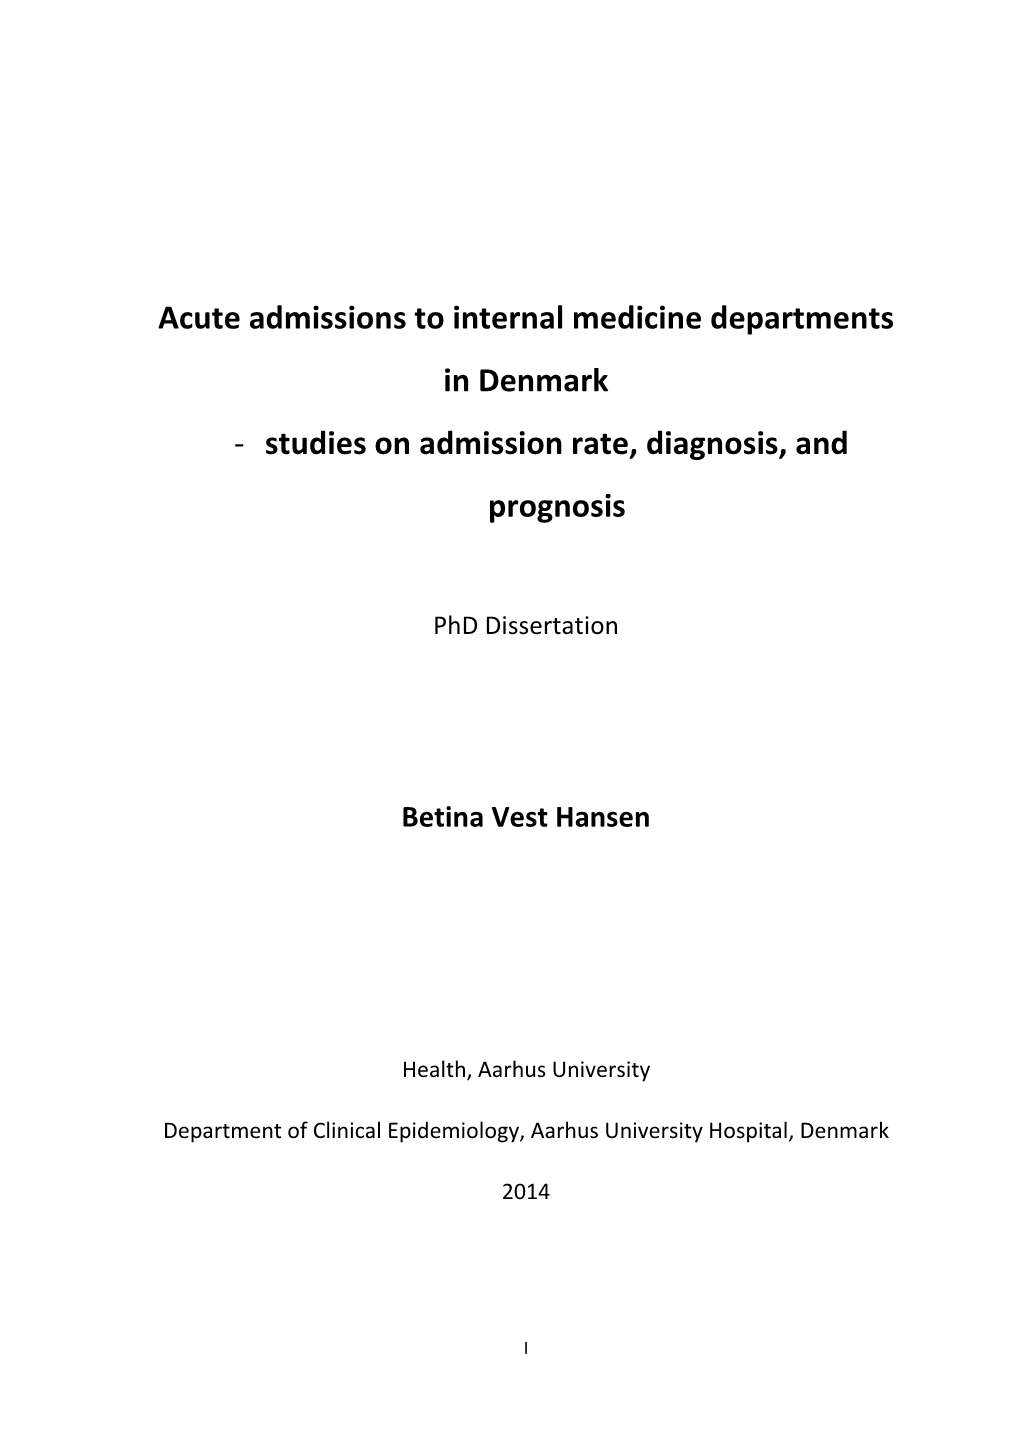 Acute Admissions to Internal Medicine Departments in Denmark - Studies on Admission Rate, Diagnosis, and Prognosis